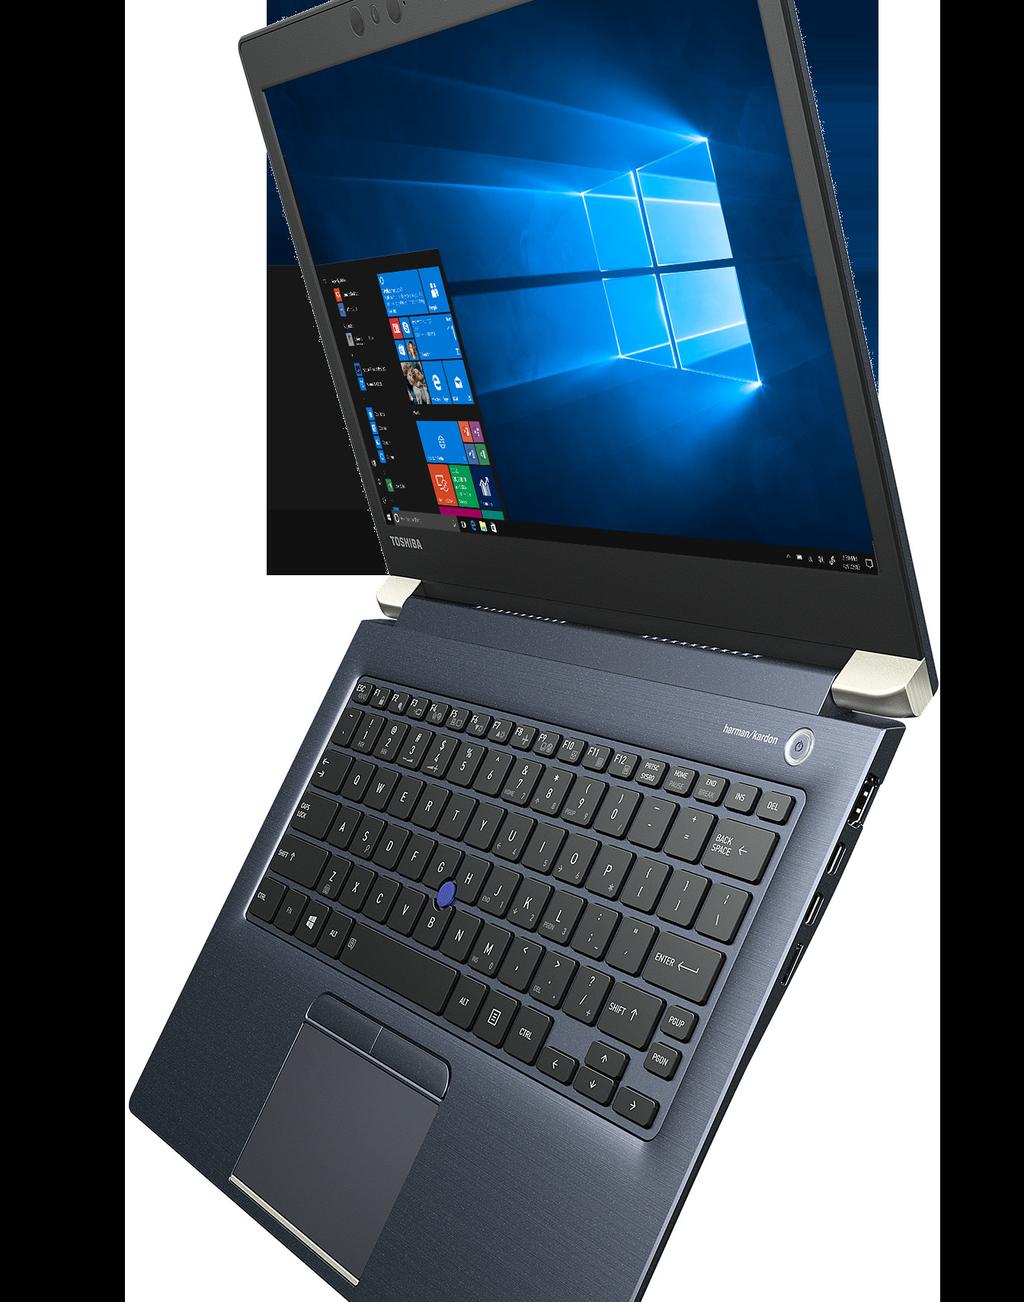 Even with the streamlined design, the new Tecra X40 delivers the power and innovations expected from a Toshiba business solution.» 14.